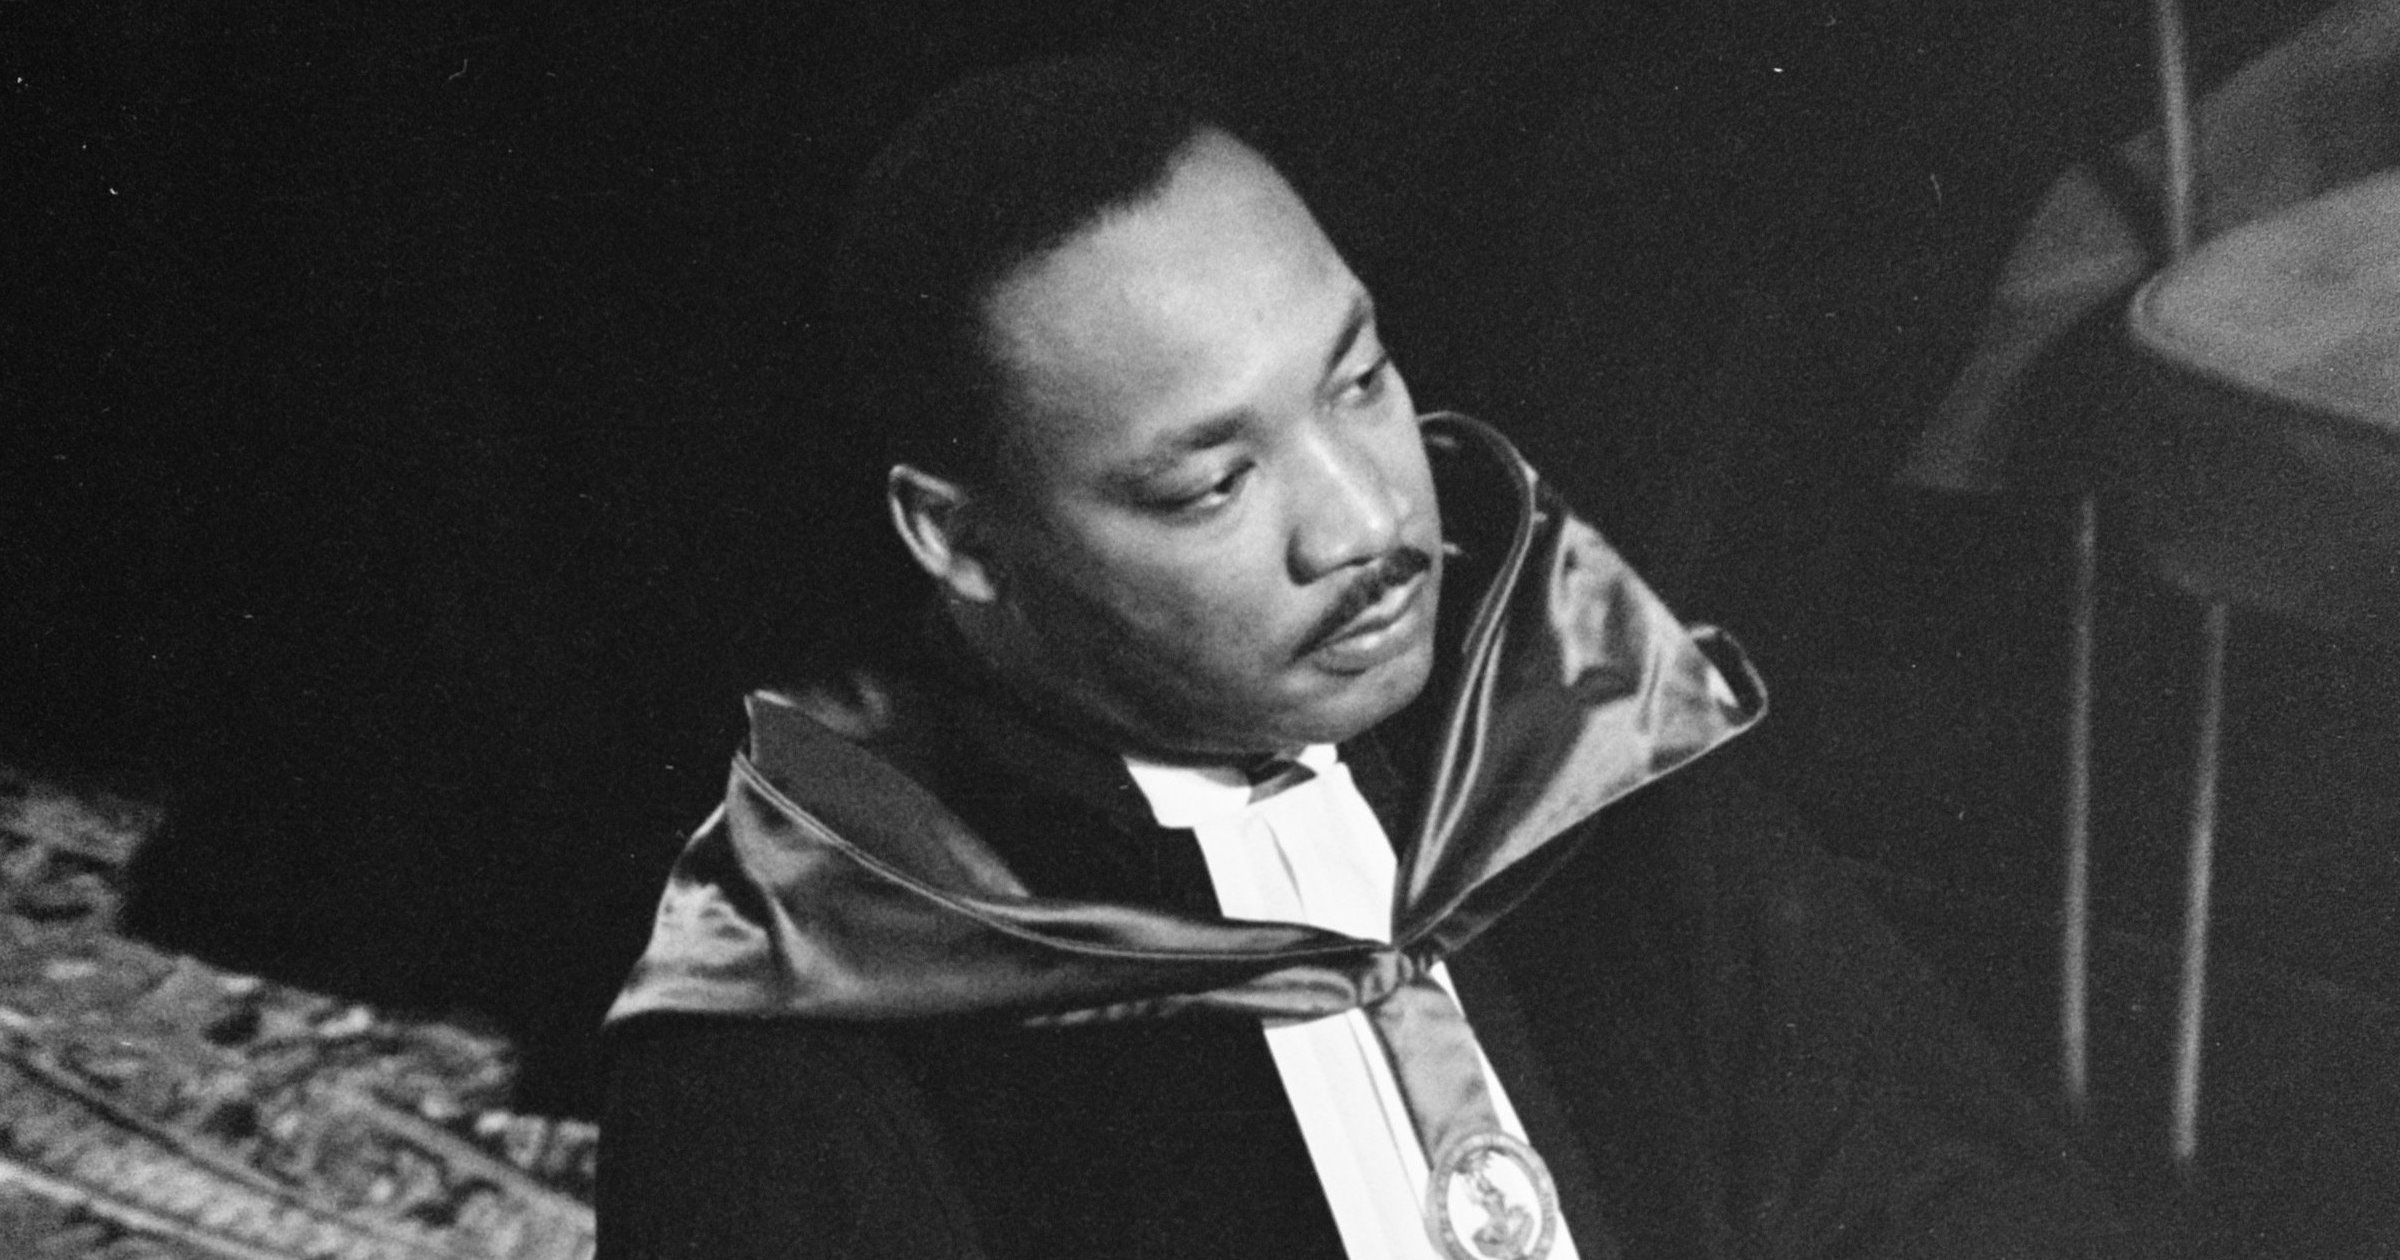 Celebrating Martin Luther King’s ‘Great Revolution’